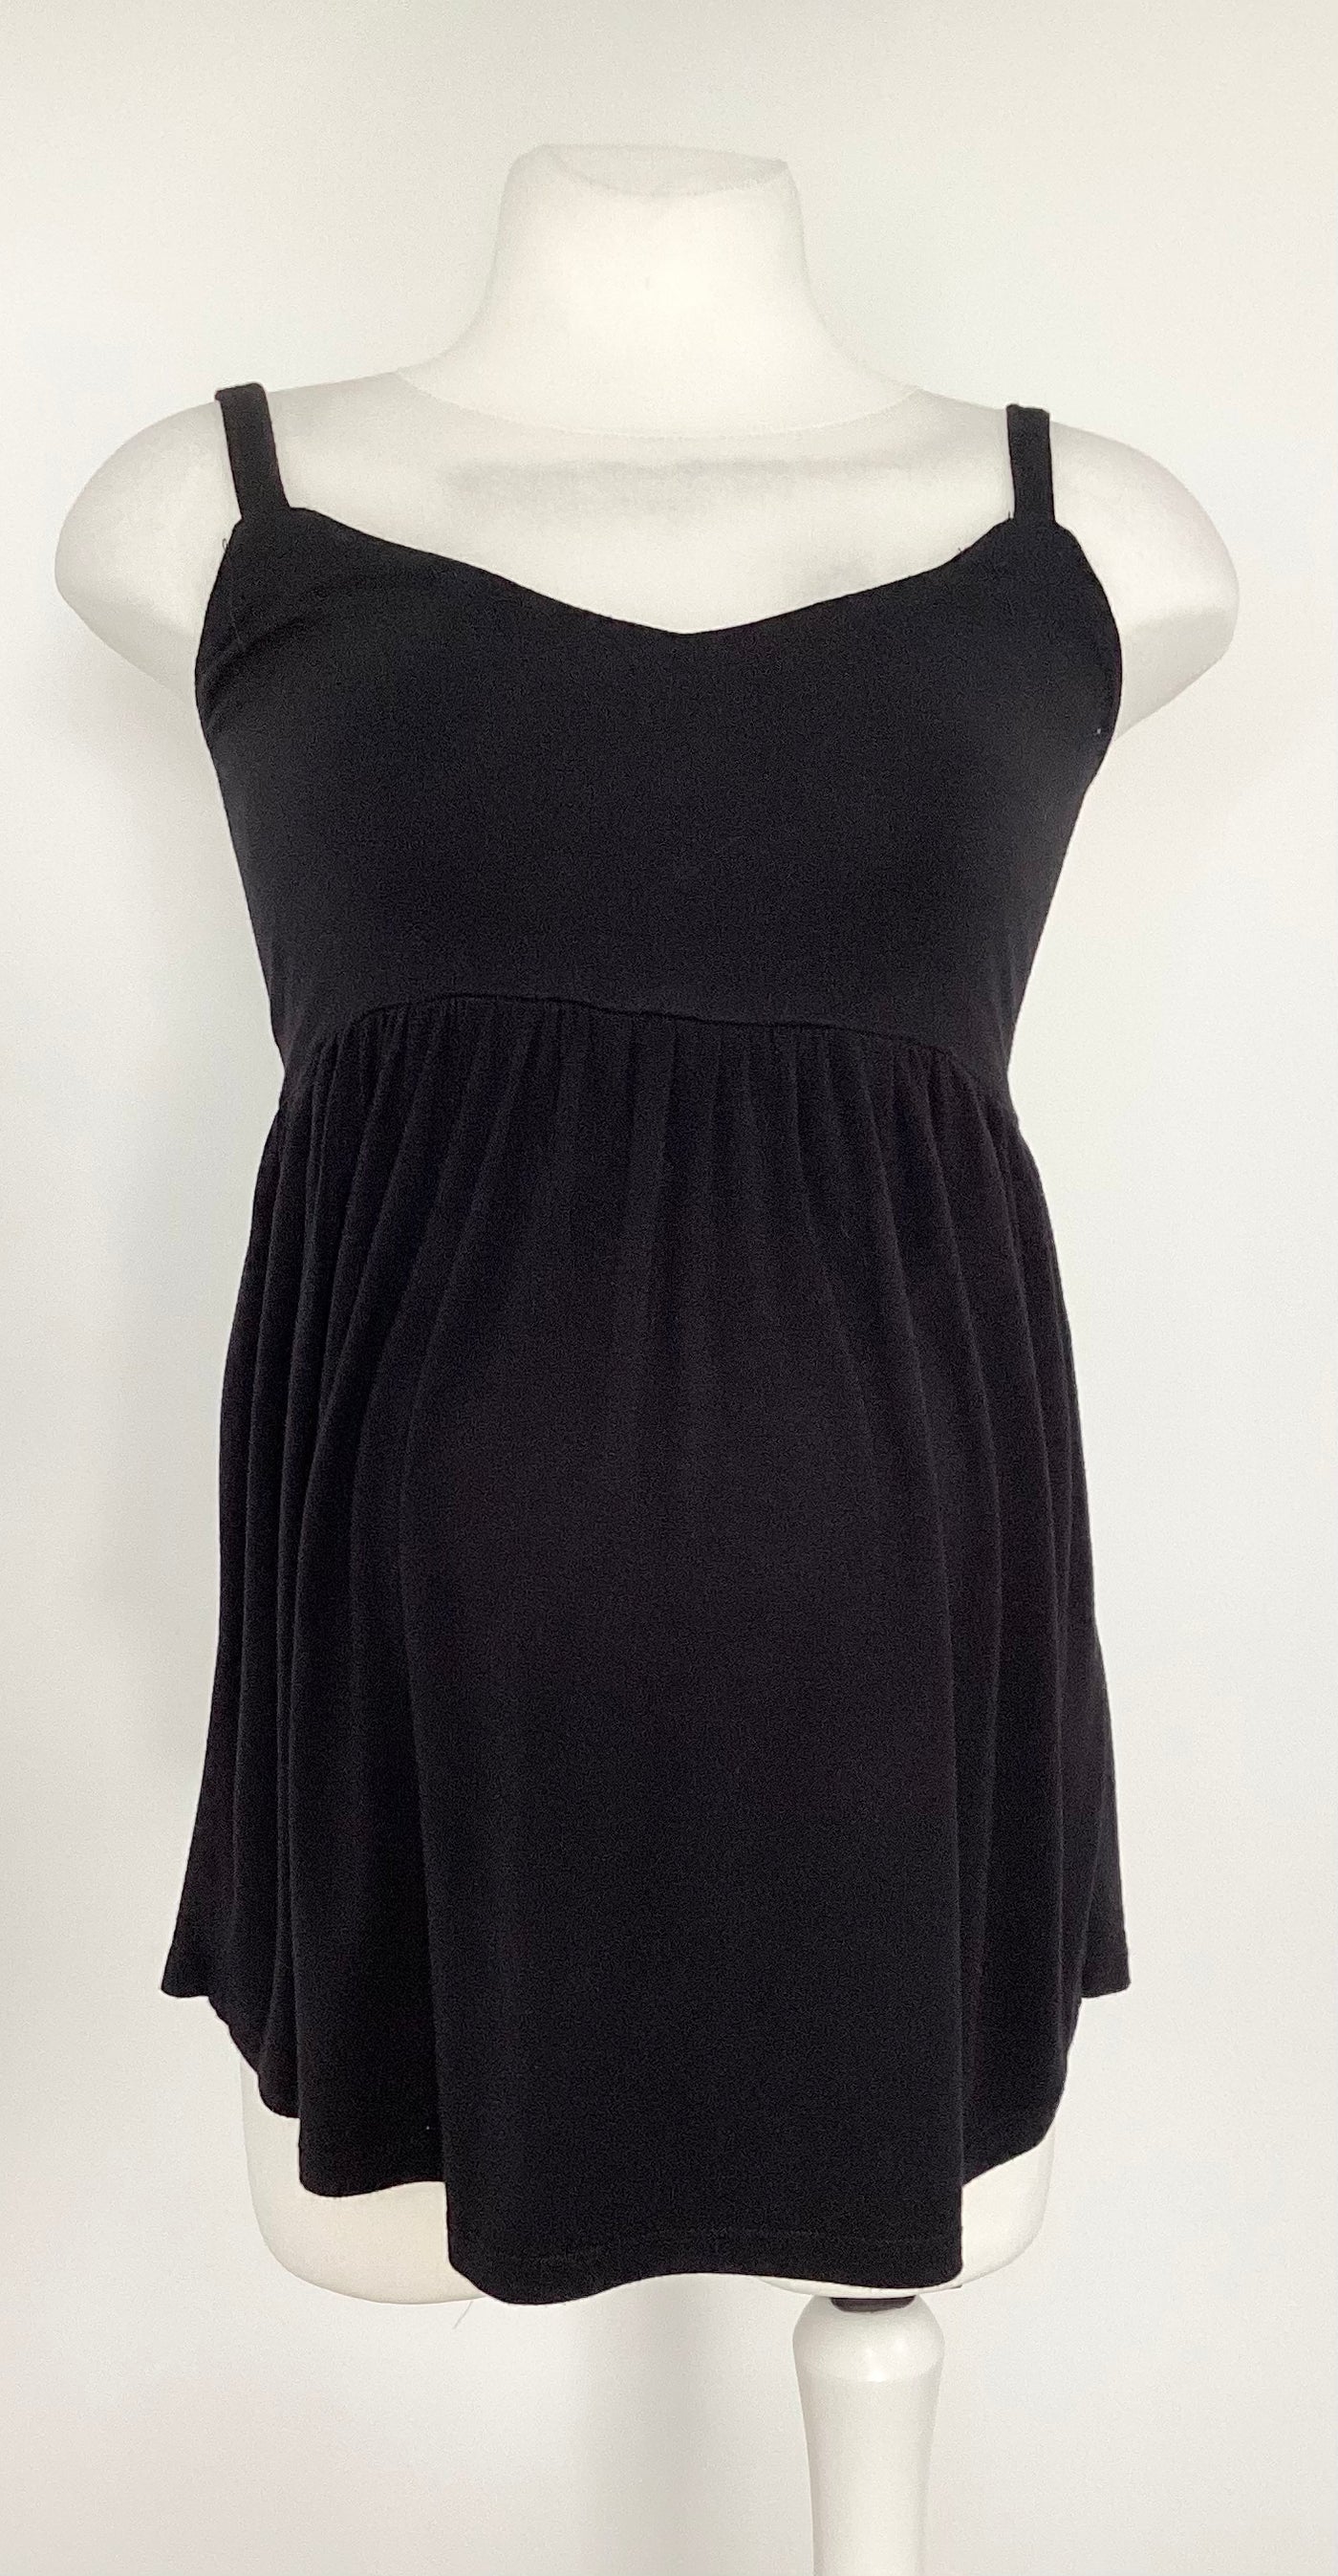 Dorothy Perkins Maternity Black Camisole Smock Top - Size 8